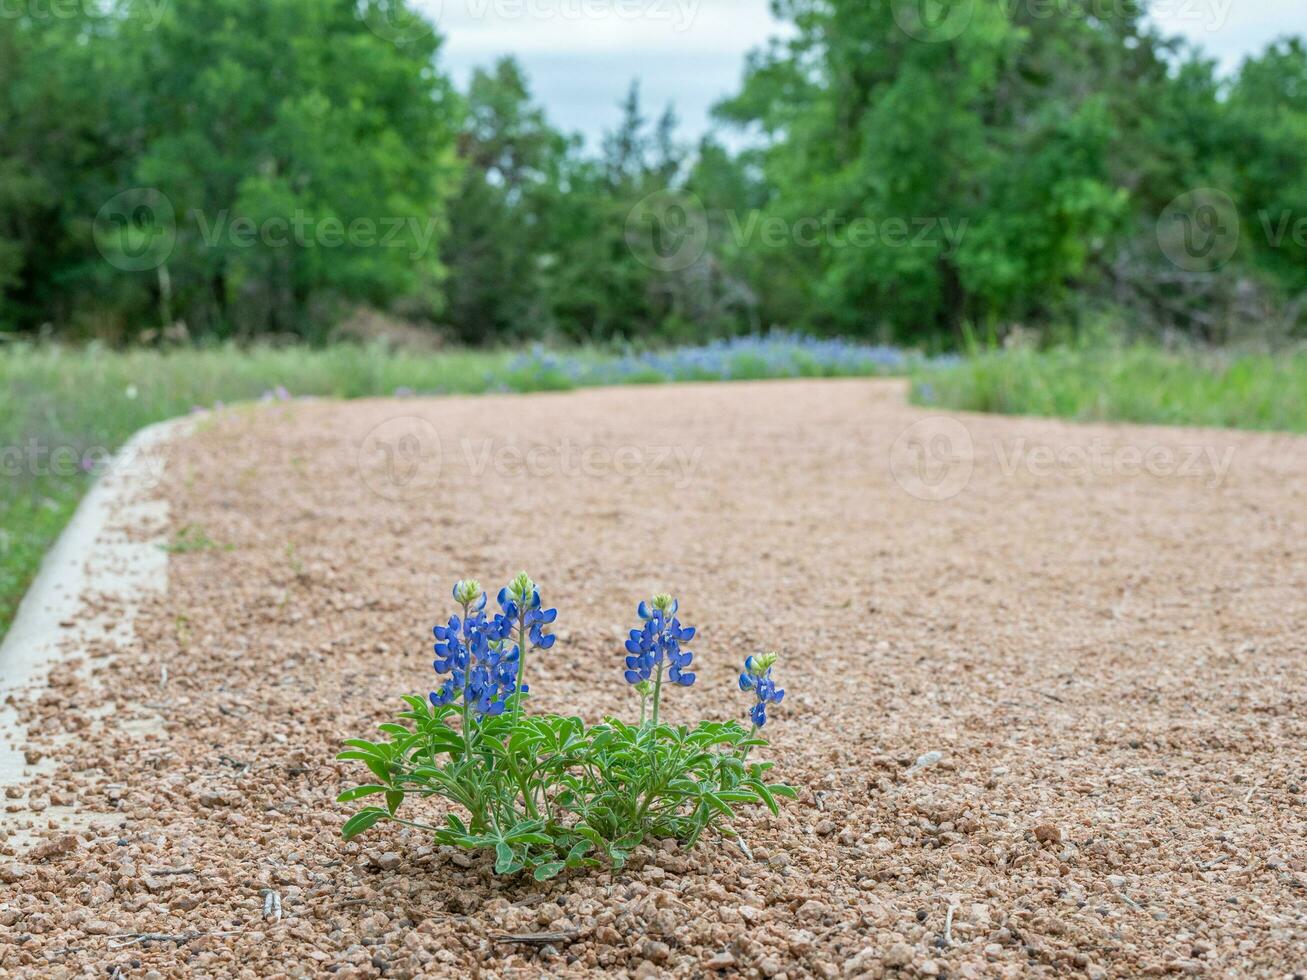 Bluebonnet flowering in gravel during a Texas spring. photo